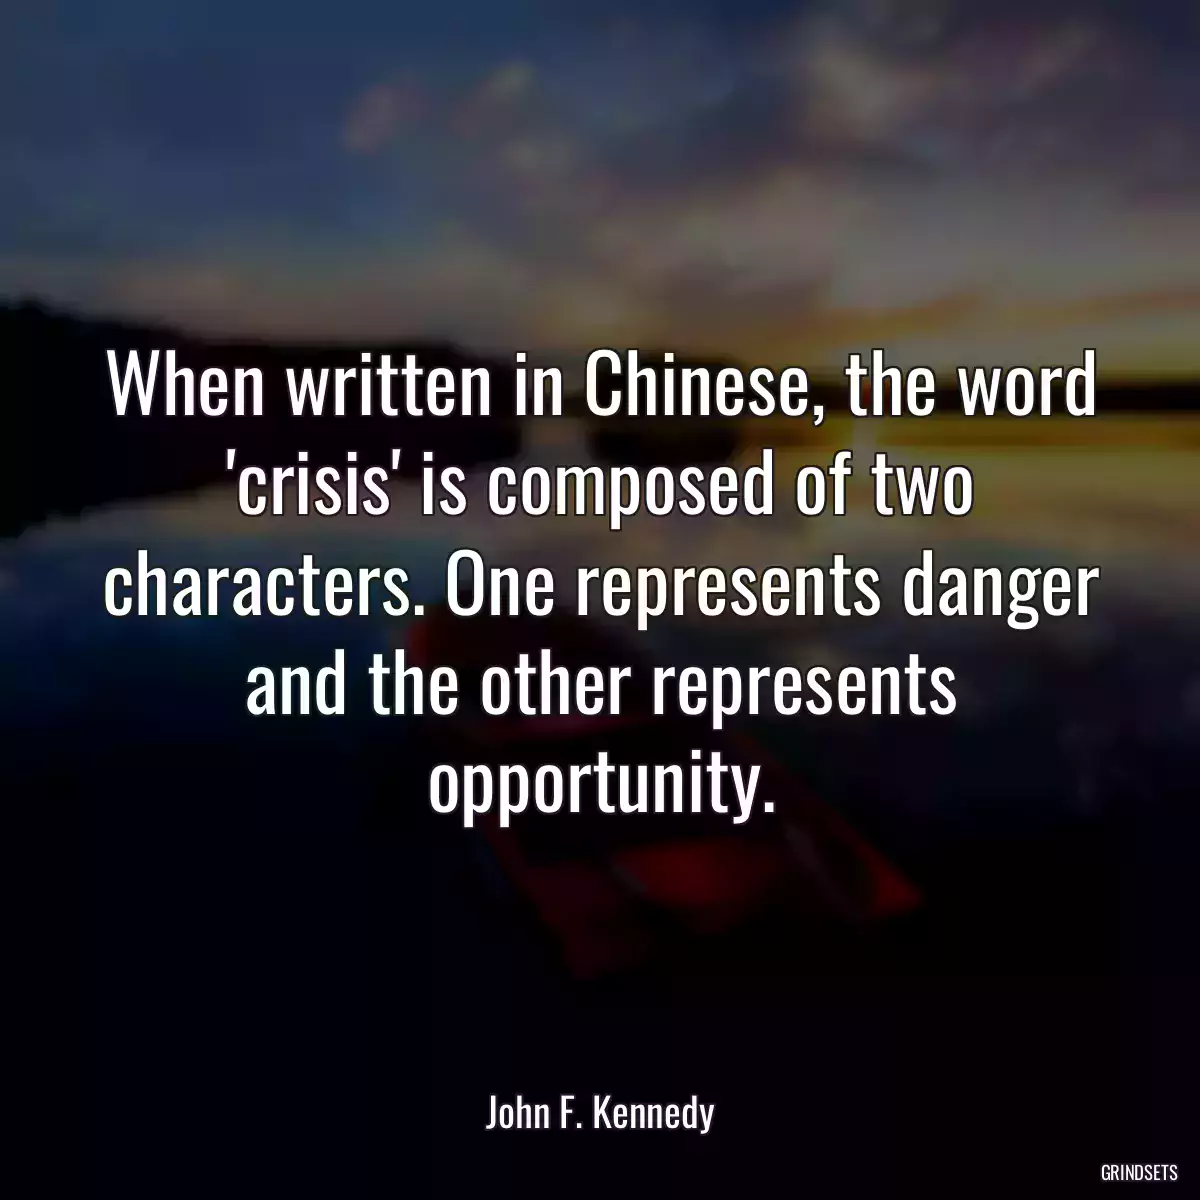 When written in Chinese, the word \'crisis\' is composed of two characters. One represents danger and the other represents opportunity.